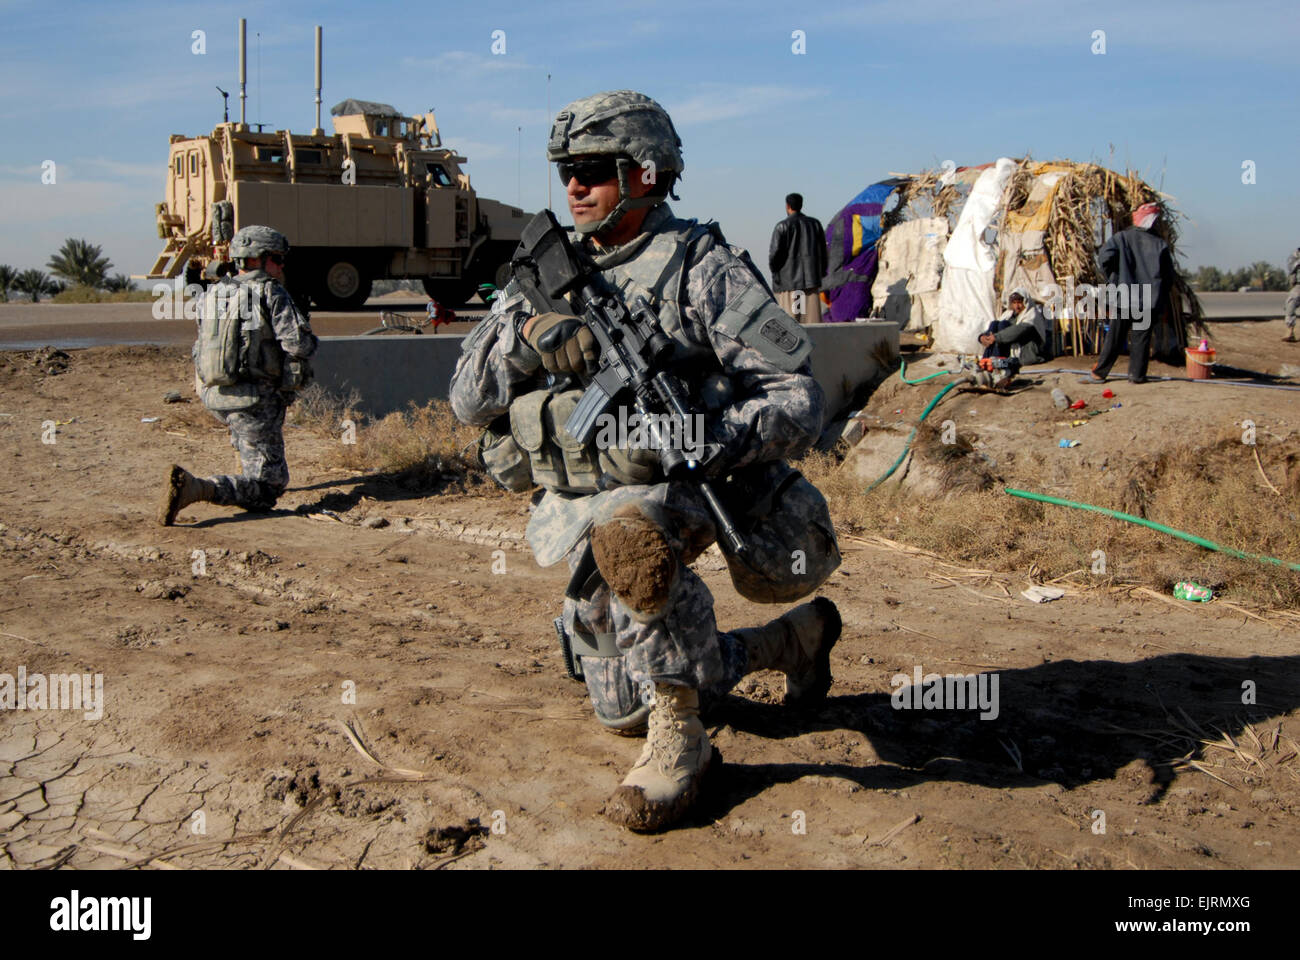 U.S. Army Cpl. Oscar Tovar from Headquarters and Headquarters Company, Charlie Company, 1st Battalion, 2nd Infantry Regiment, 172 Infantry Brigade takes a knee while sweeping Main Supply Route Tampa for improvised explosive devices as part of an un-mounted route clearance, outside of Forward Operating Base Kalsu, Iraq on Jan 3, 2009. Stock Photo